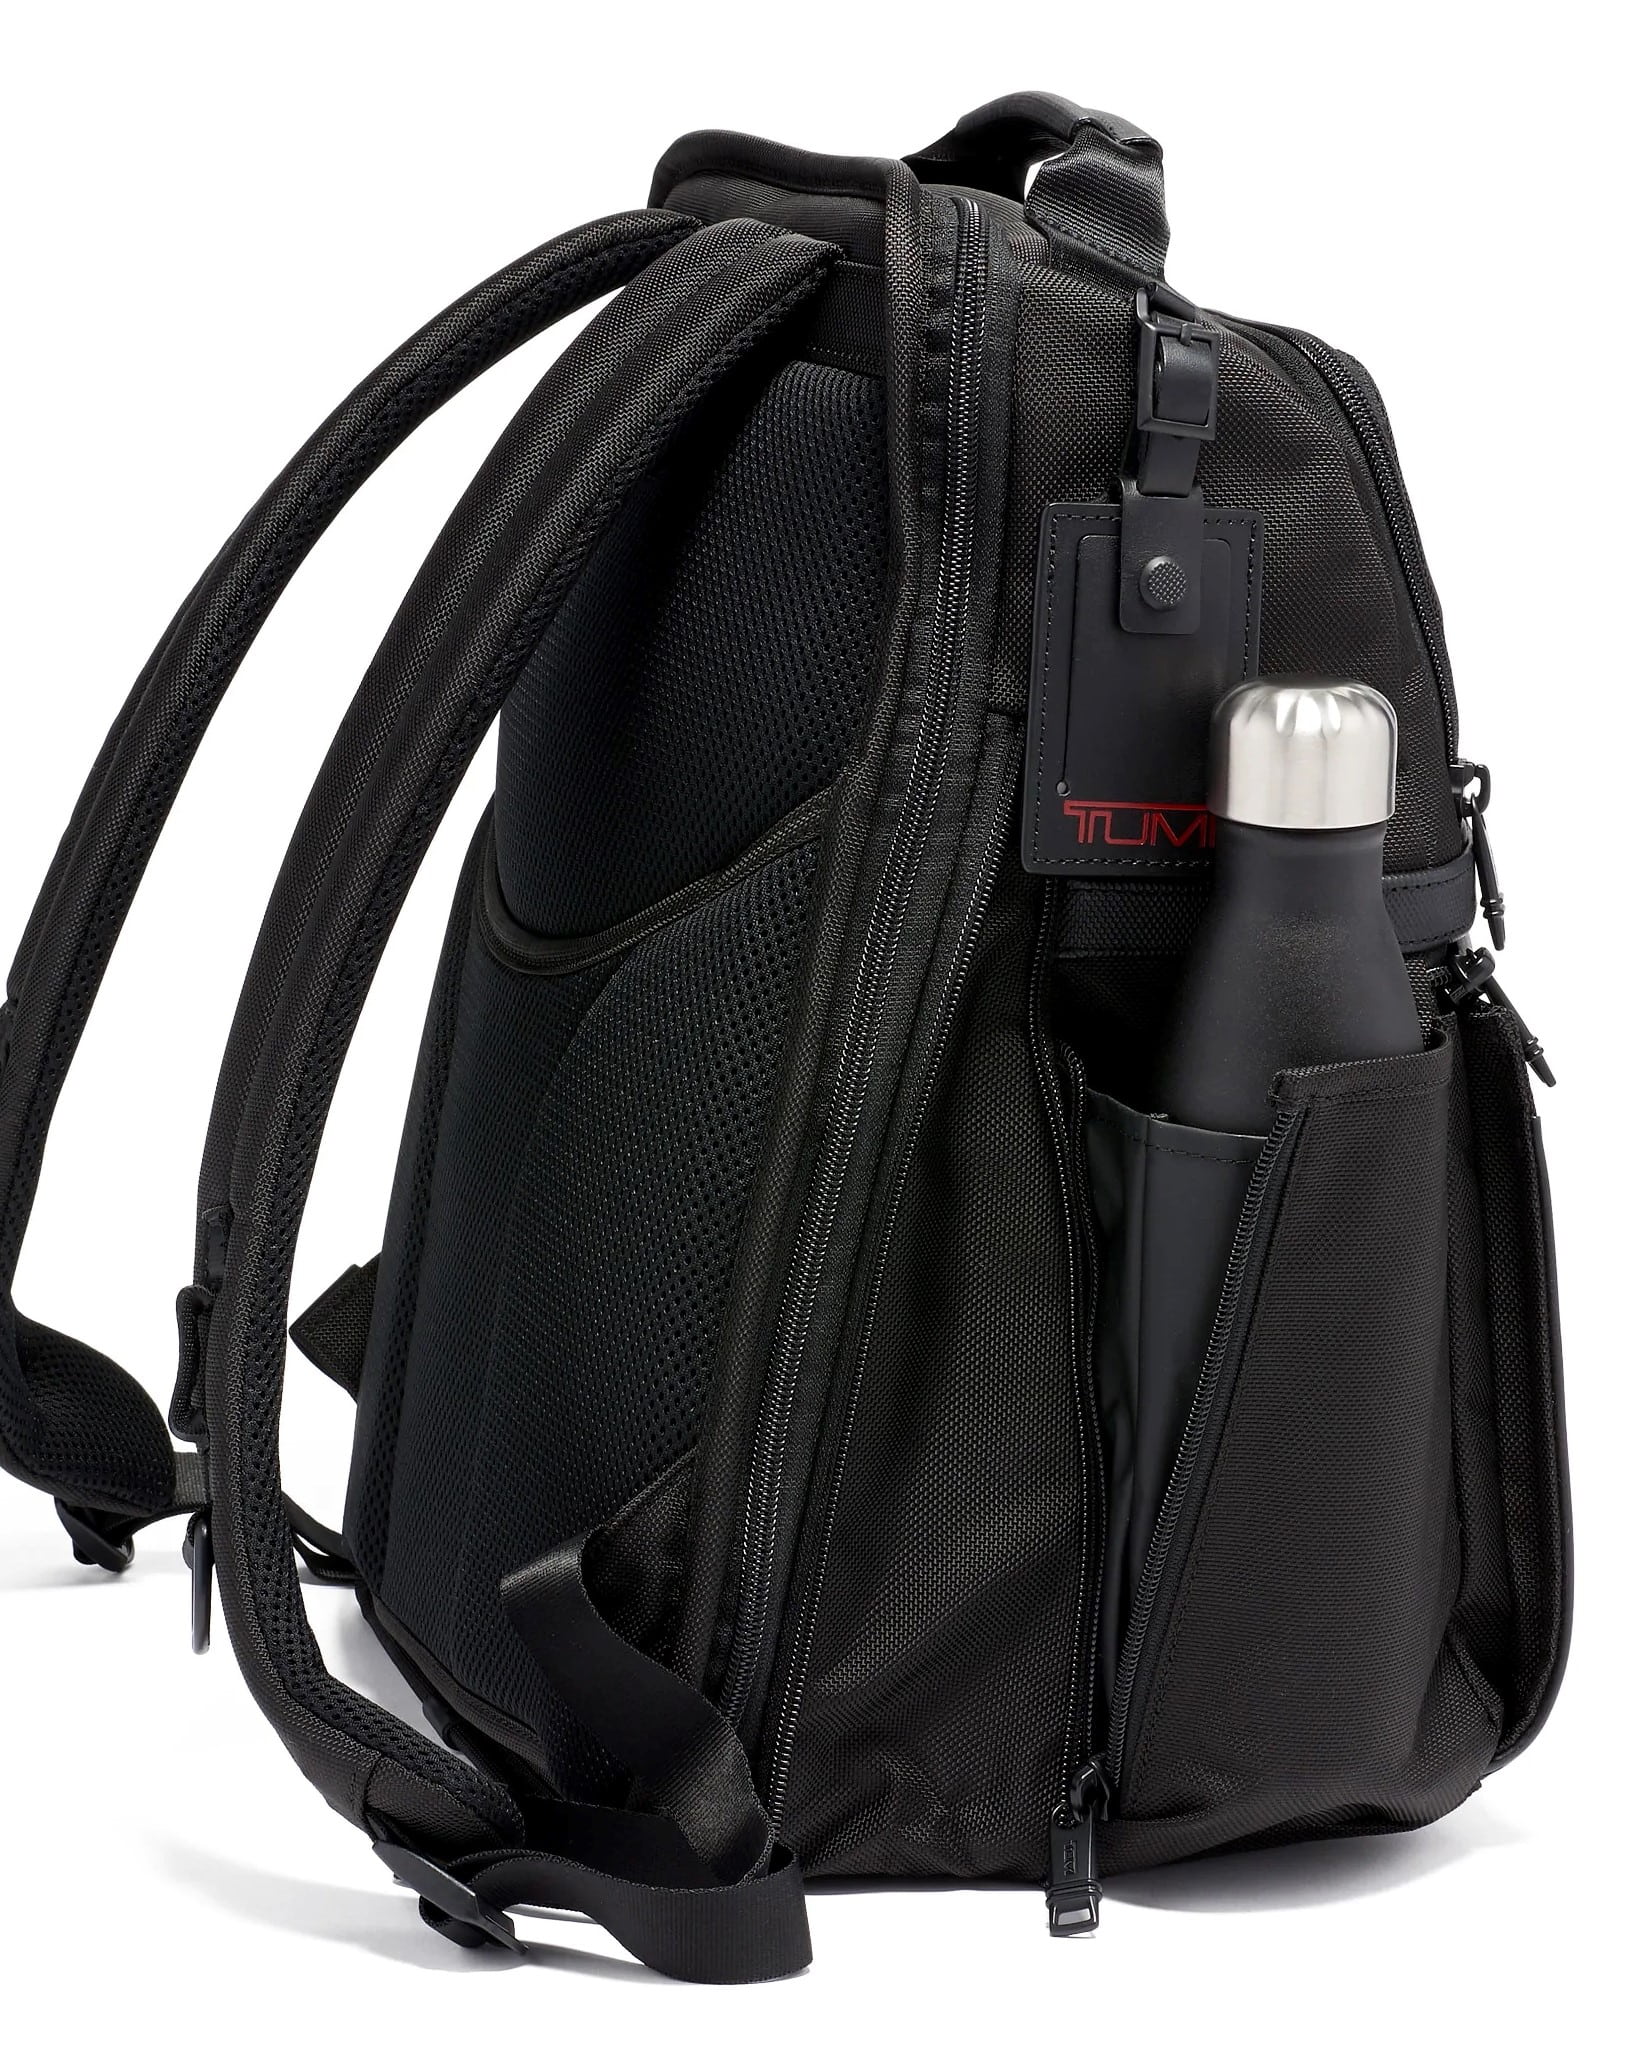 BALO LAPTOP TUMI ALPHA SLIM SOLUTIONS BRIEF PACK BACKPACK 8